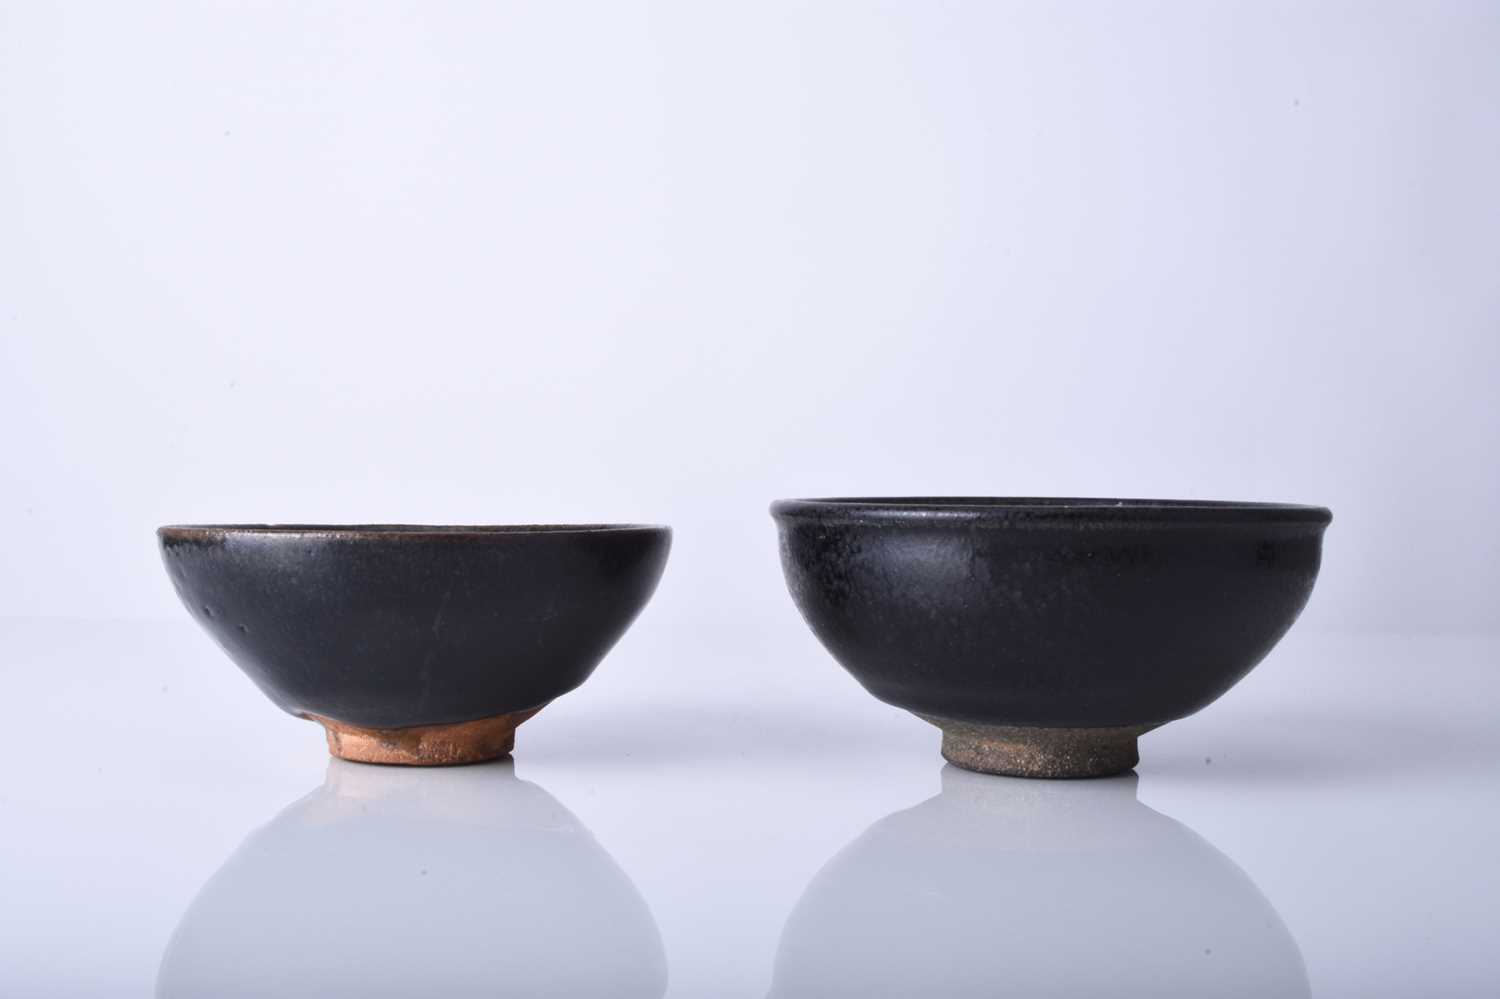 Two Chinese Jian ware bowls, Song Dynasty